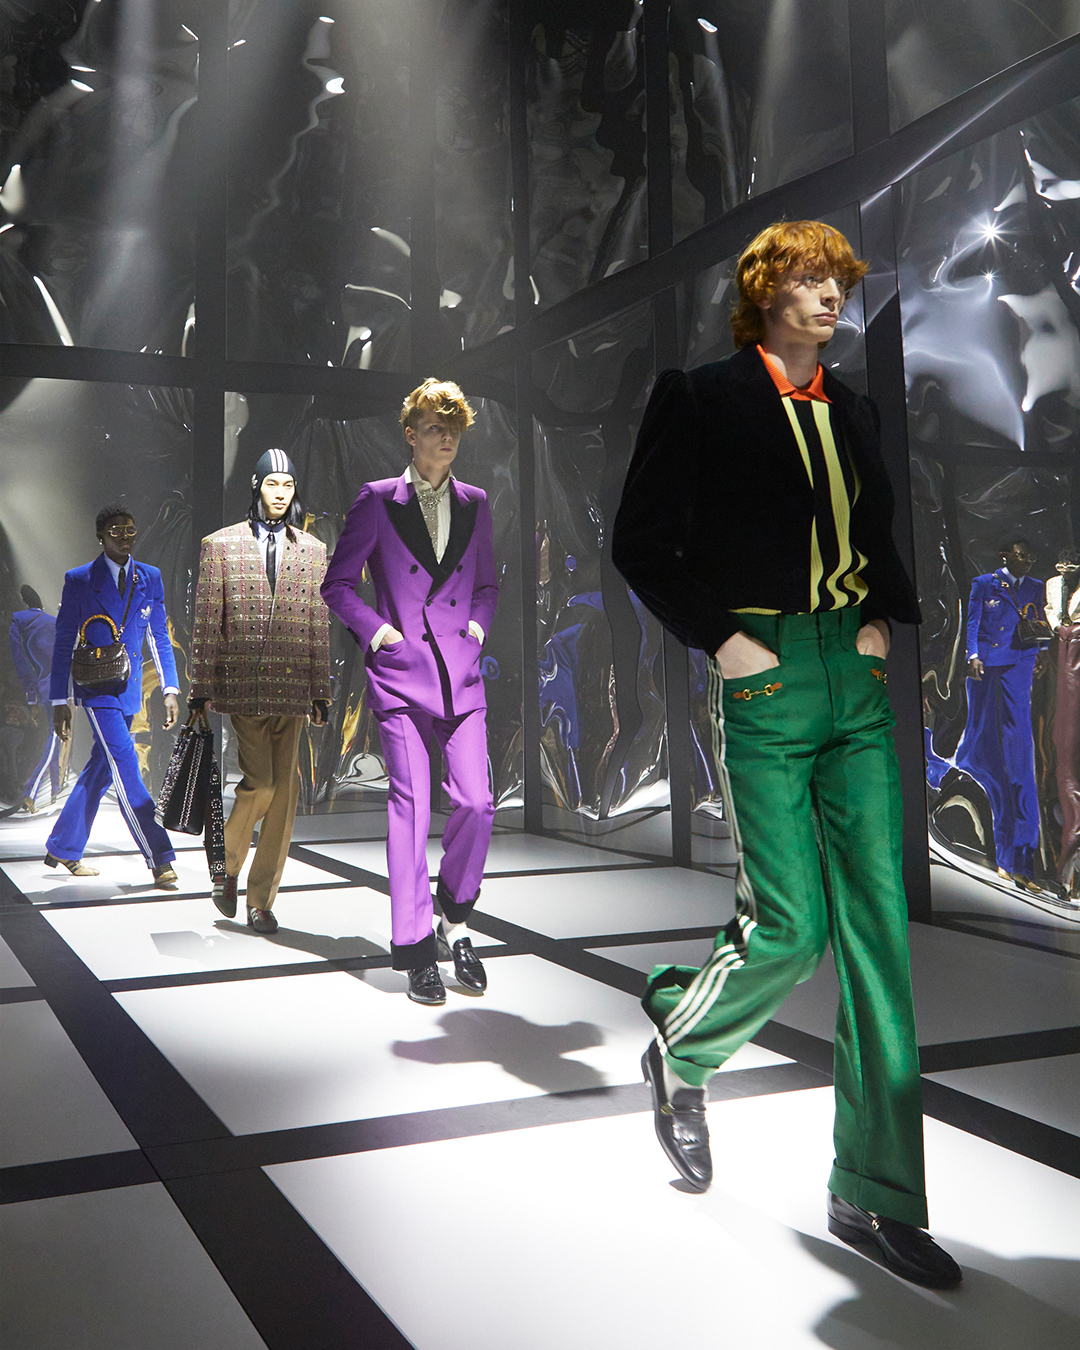 A row of four models walking the black and white grid runway of the Exquisite Gucci fashion show wearing various looks from the new collection. There are funhouse-style mirrors along the walls.